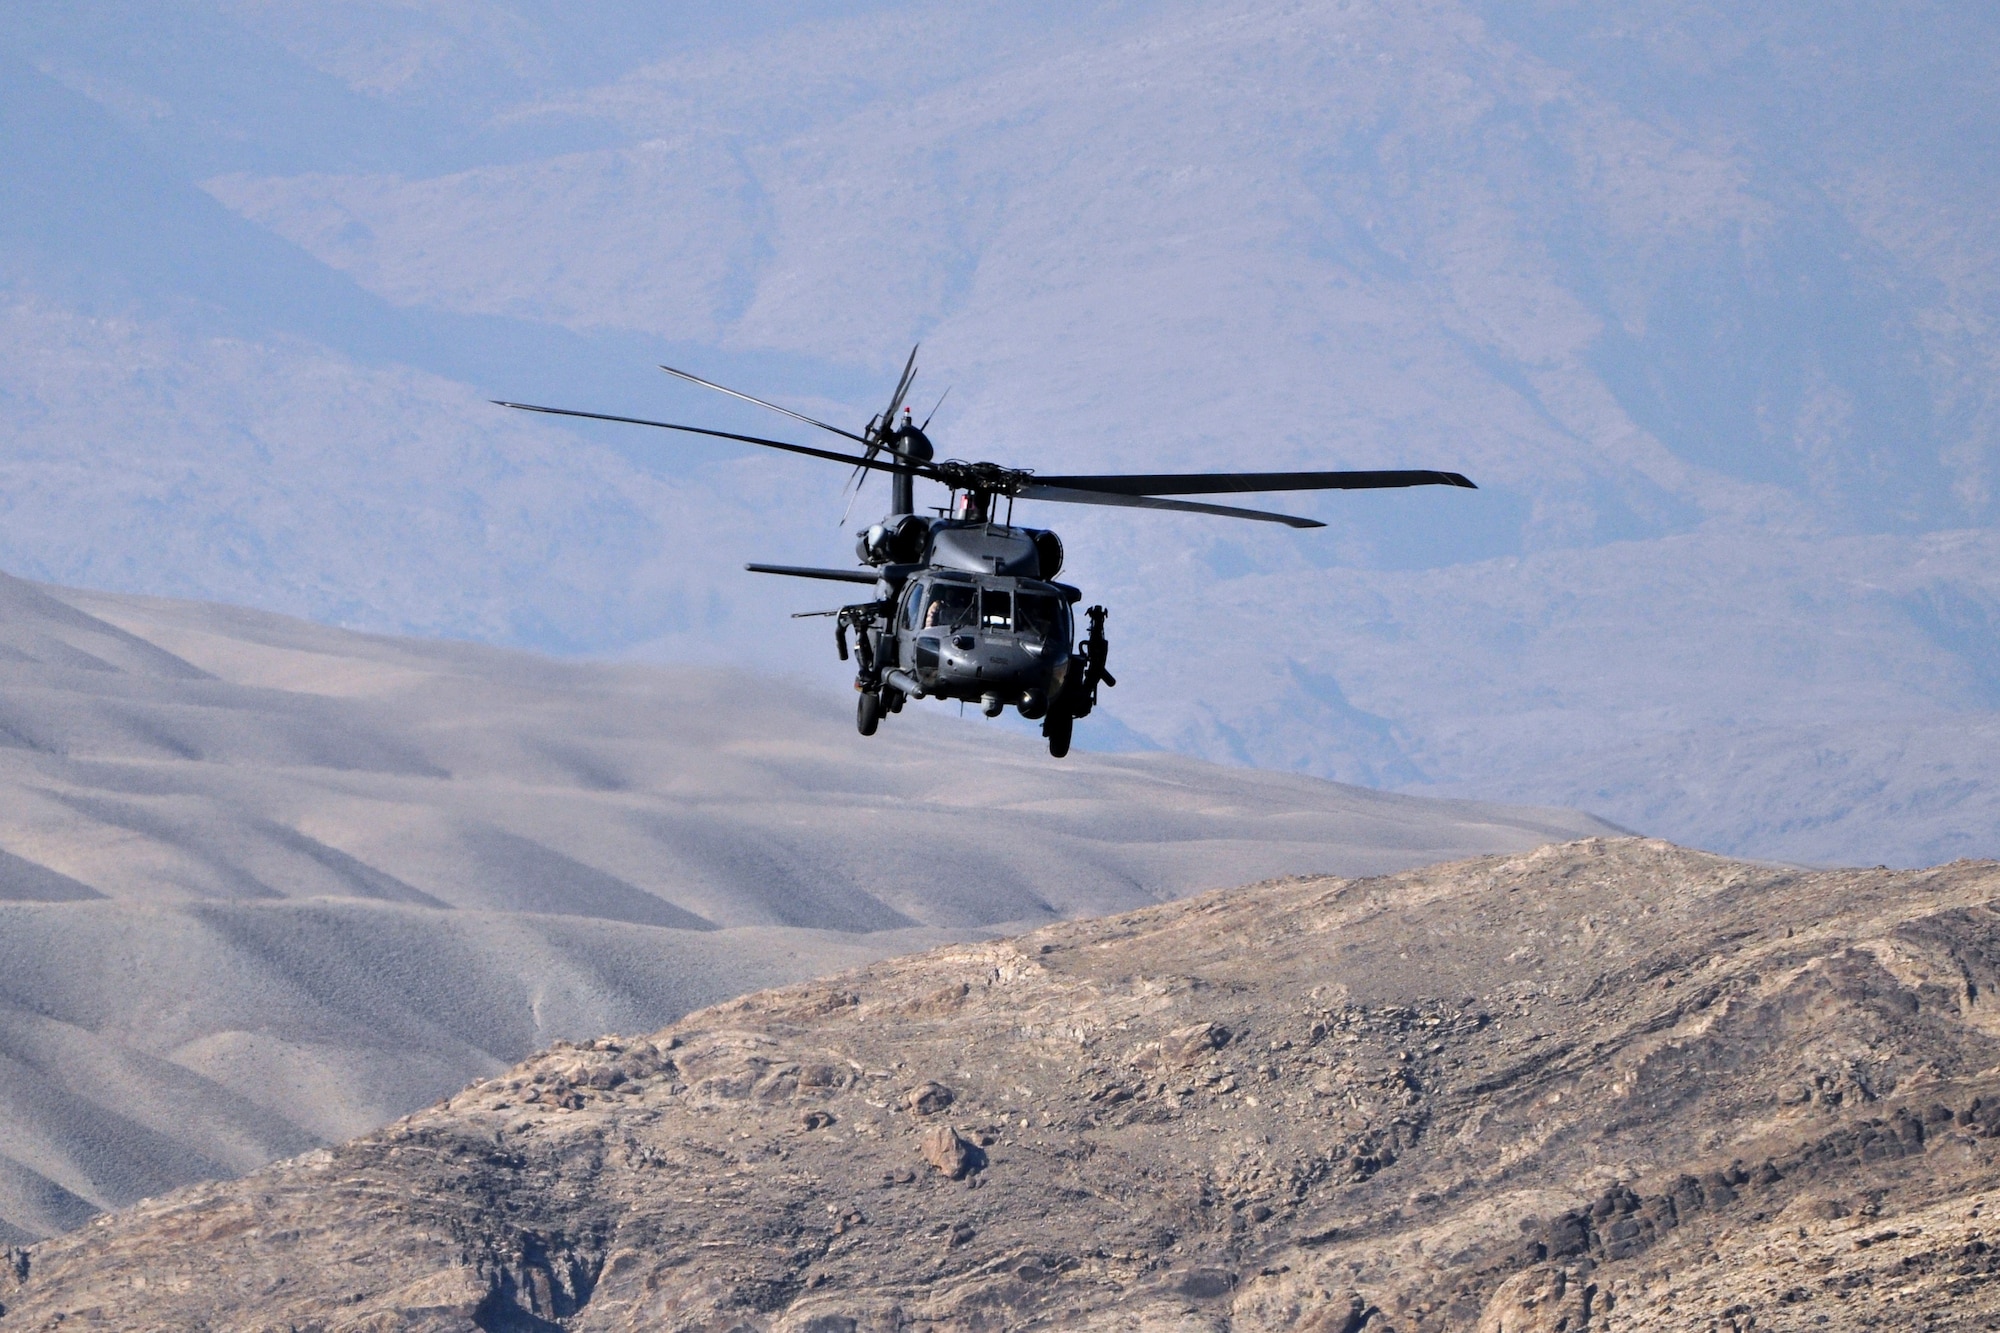 An HH-60G Pavehawk assigned to the 83rd Expeditionary Rescue Squadron returns from a forward operating base where they supported ground forces earlier this year.  Airmen from Bagram's 83rd ERQS recently flew into a hostile valley, April 23, 2011, to recover the pilots of a downed Army helicopter. (U.S. Air Force photo by Capt. Erick Saks)